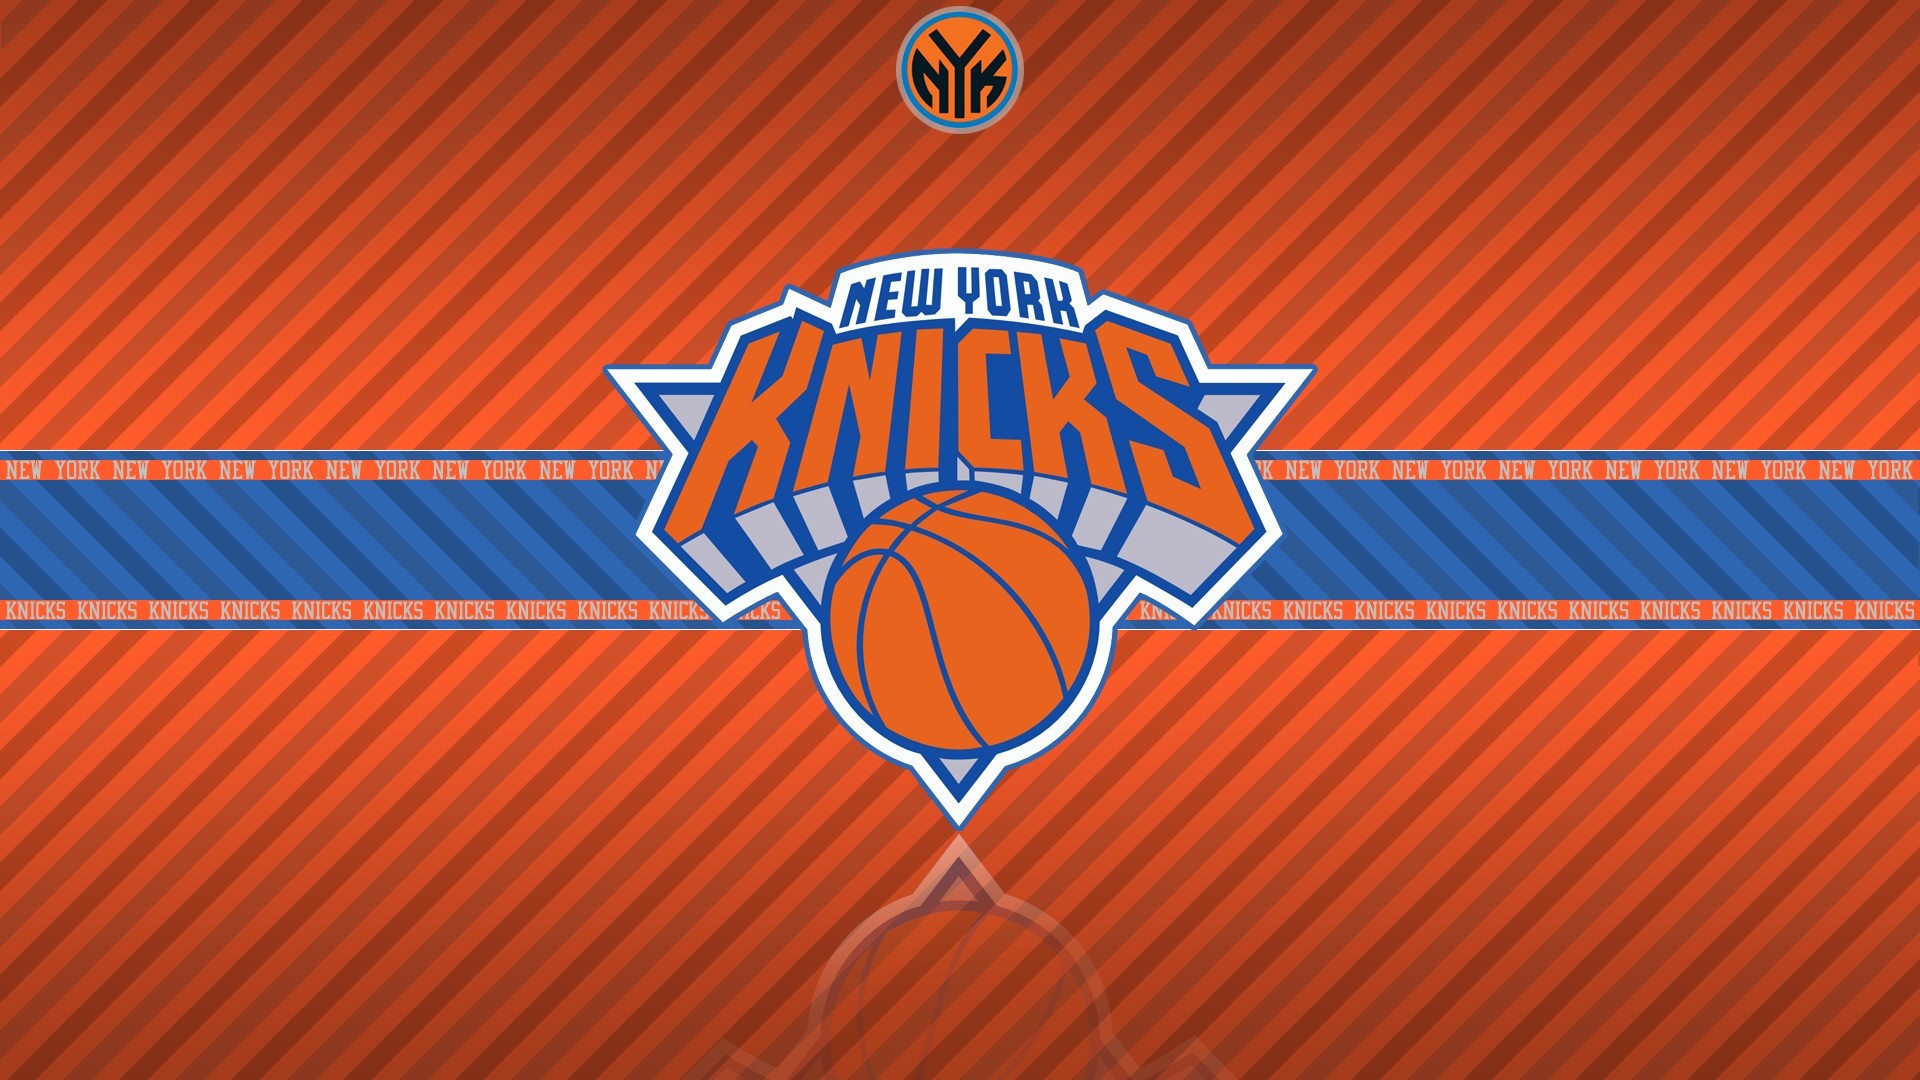 1920x1080 Related Wallpapers from Nike Basketball Wallpaper. New York Knicks Wallpaper